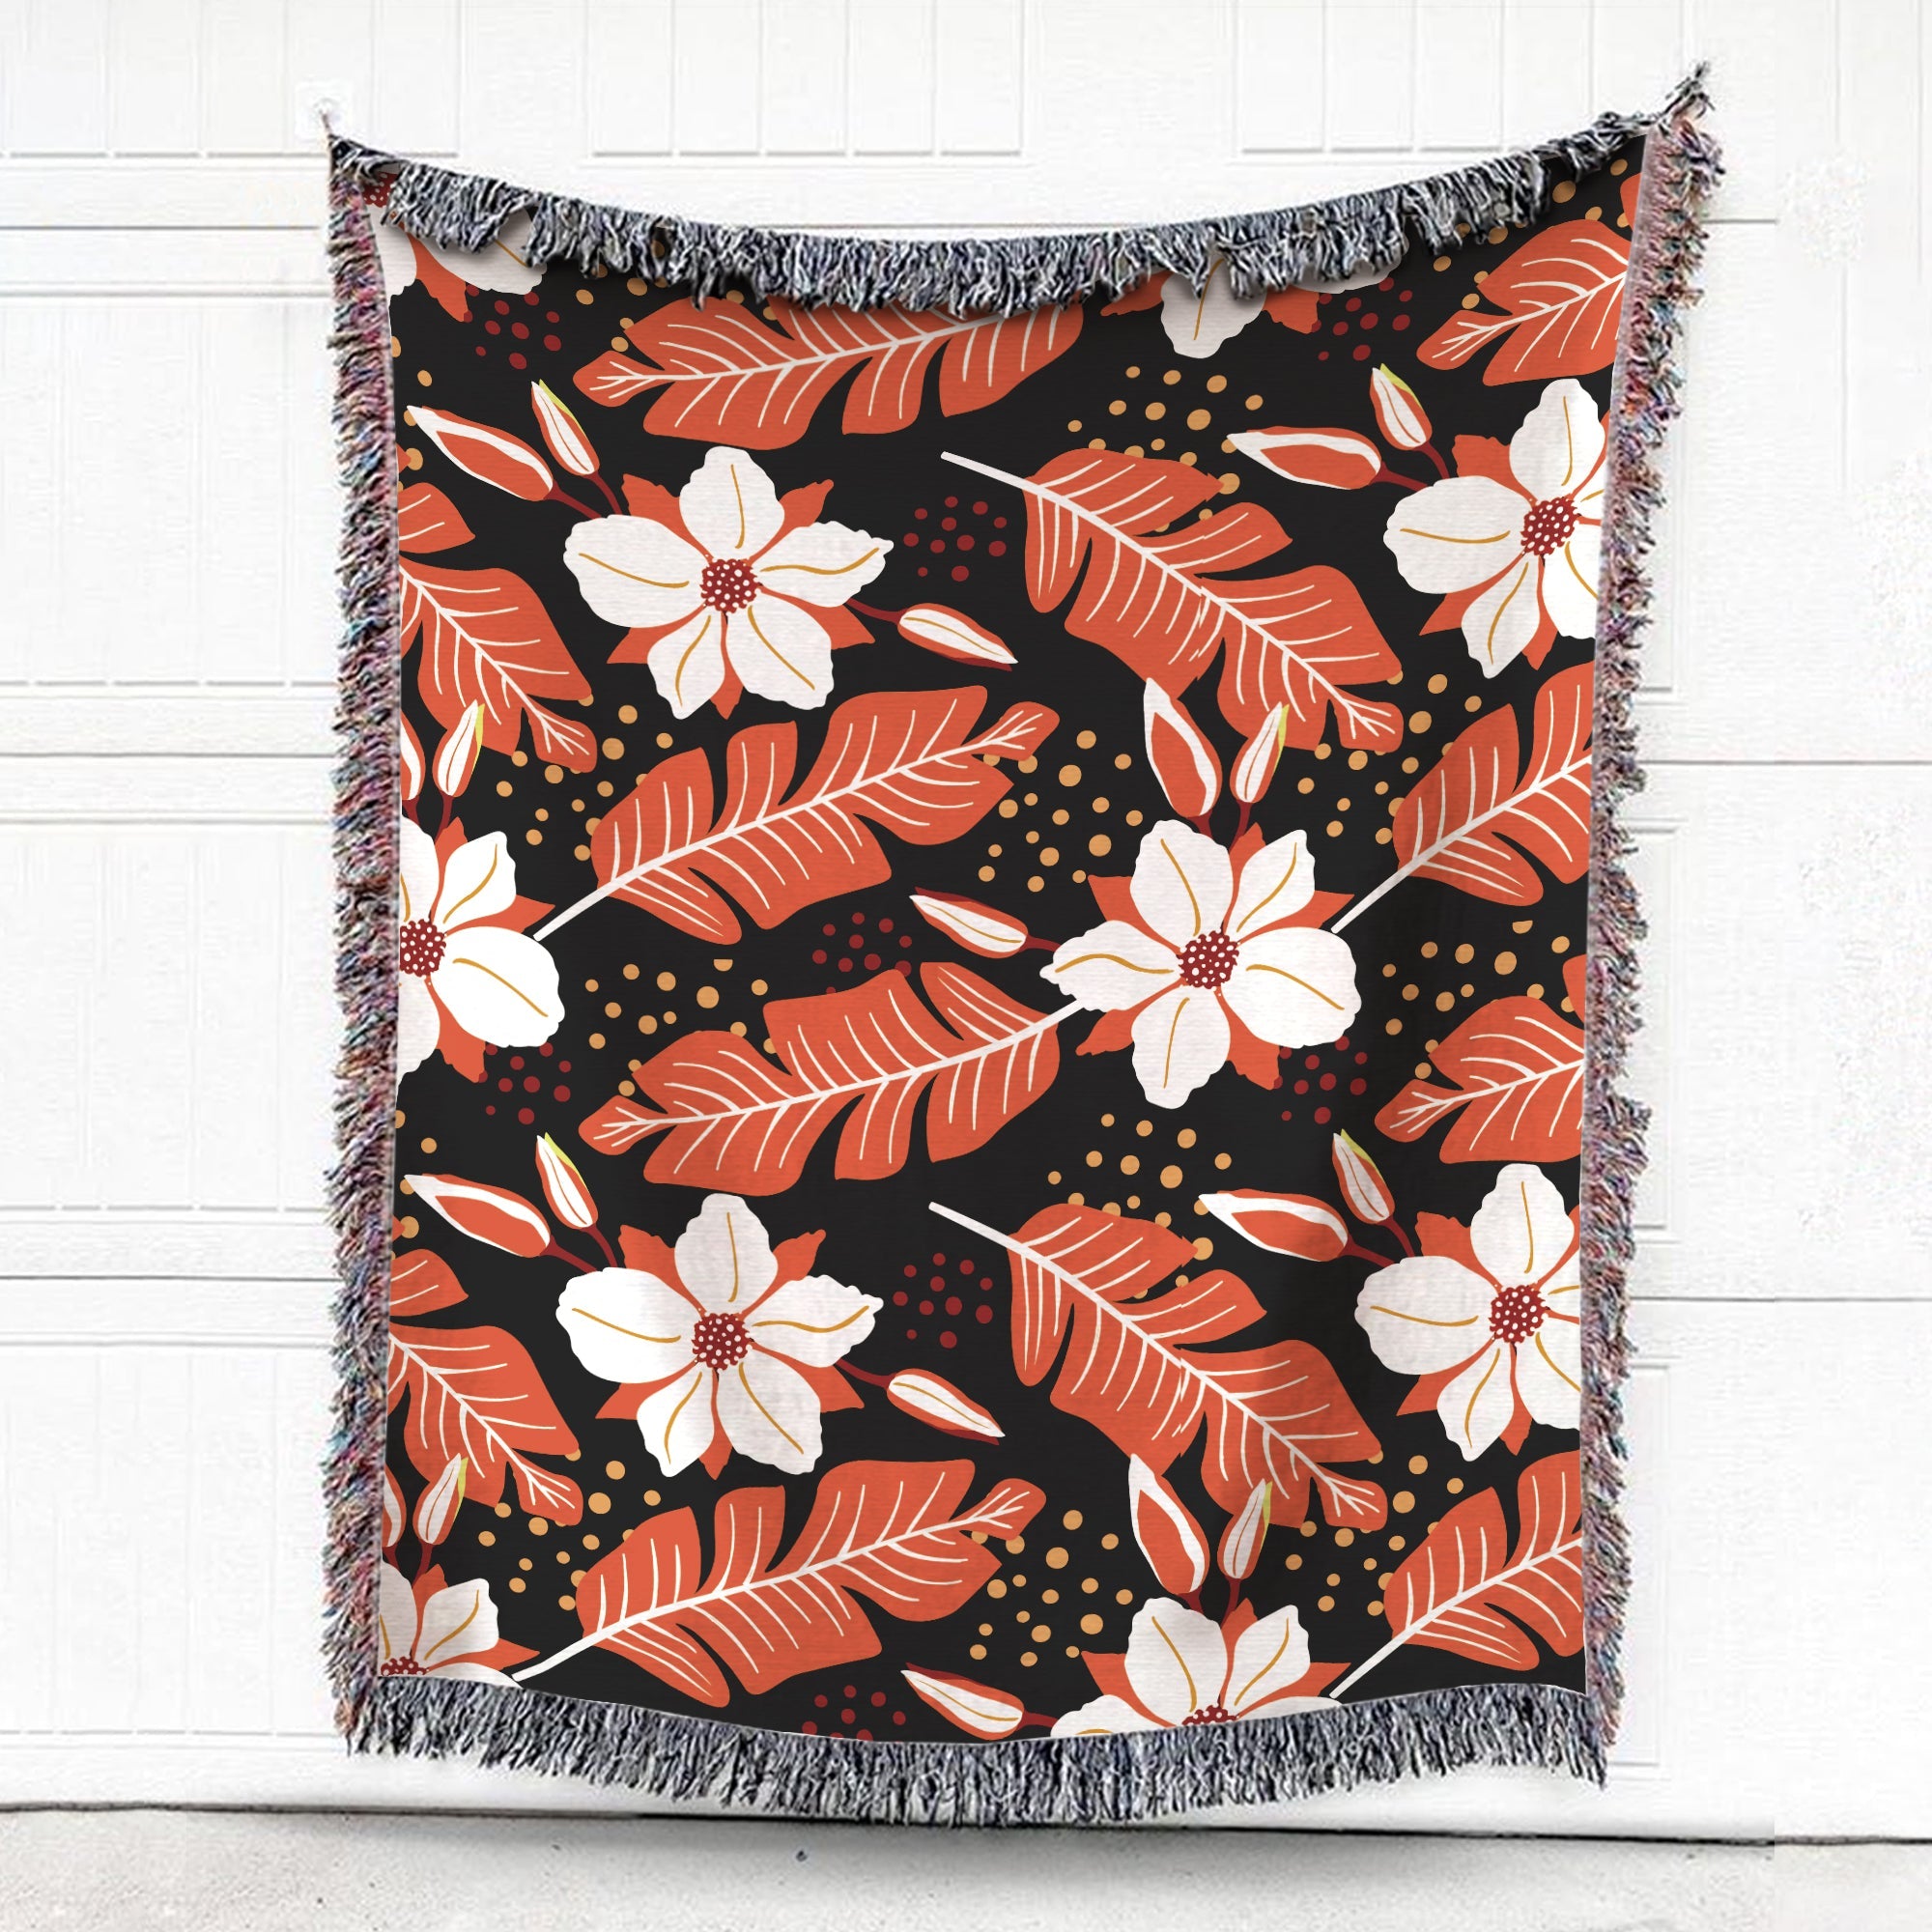 White Flowers And Red Leaves Woven Blanket